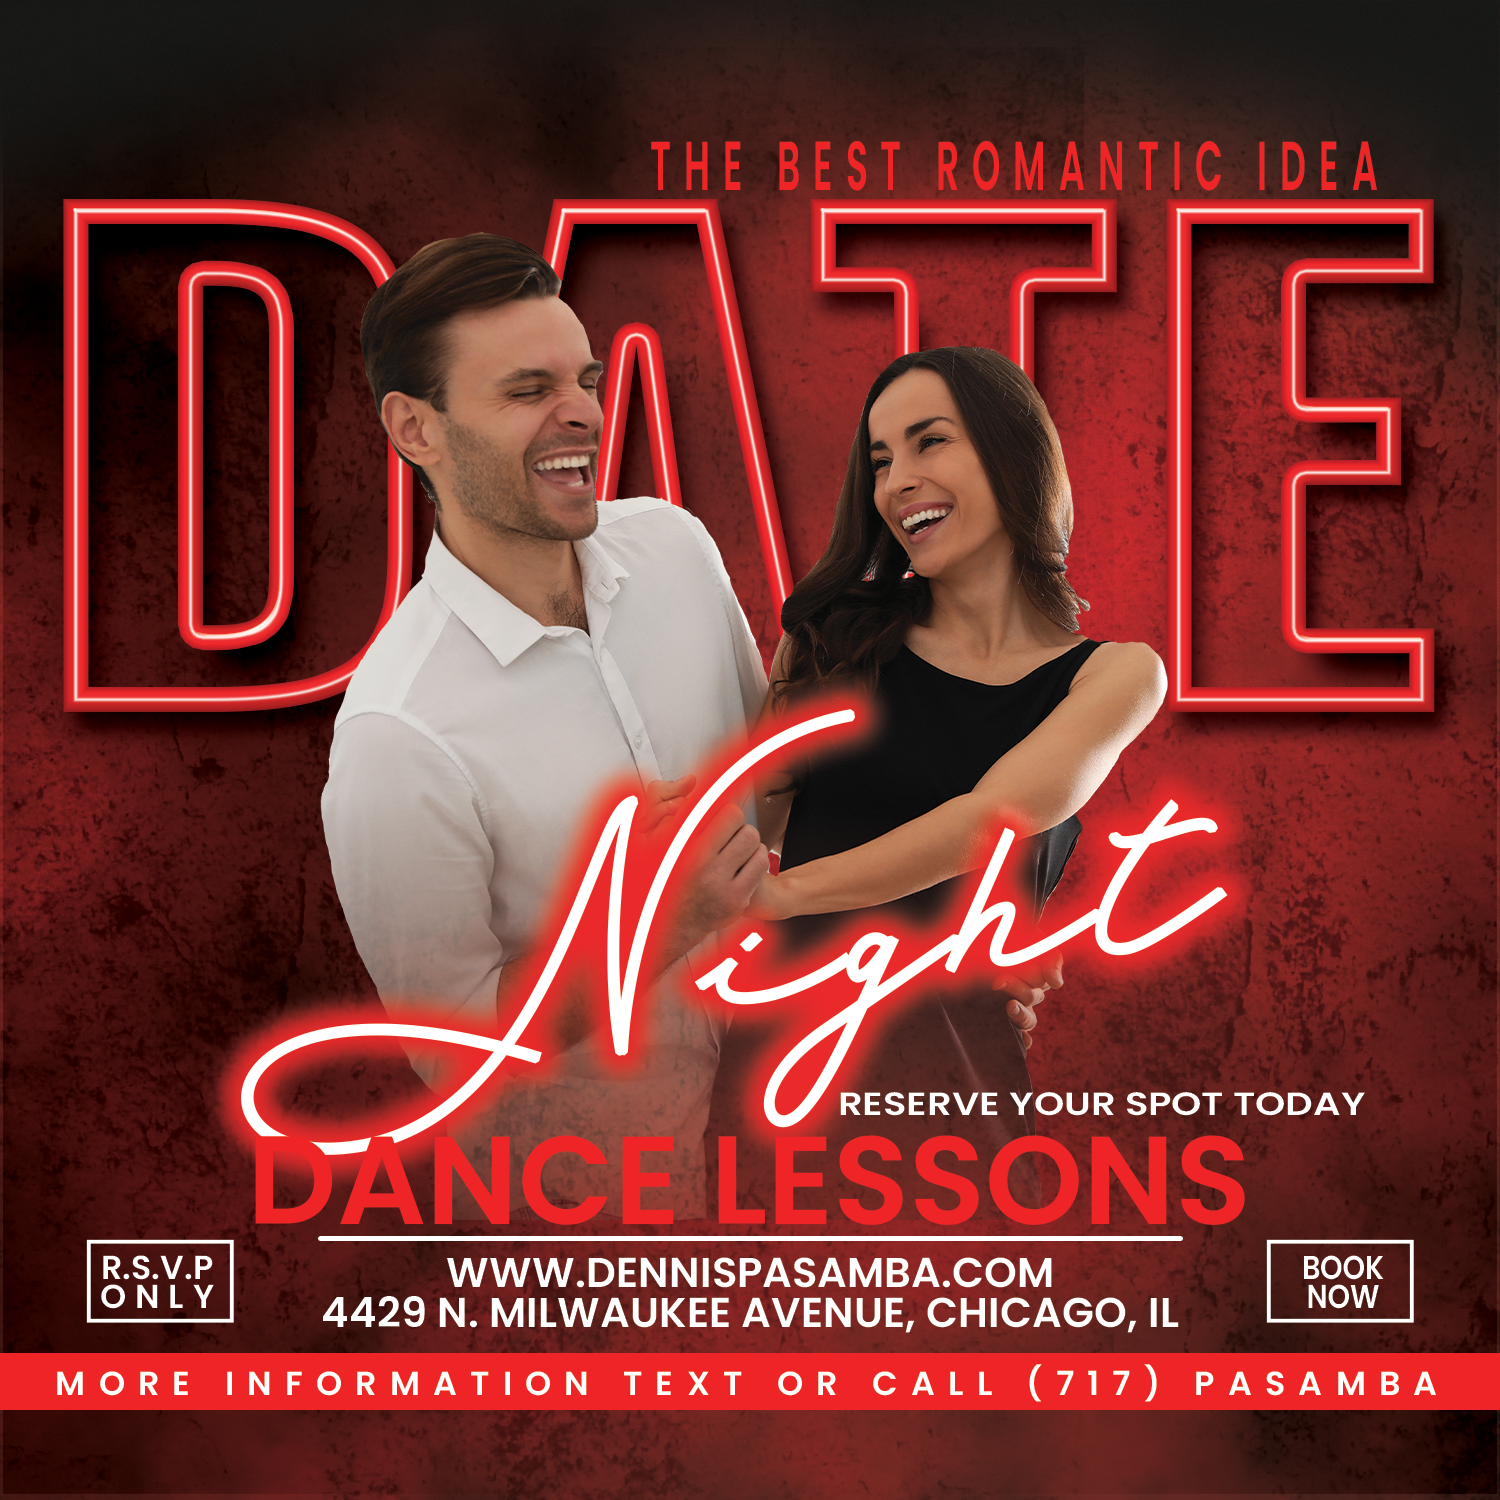 Date night ideas | Dance Lessons